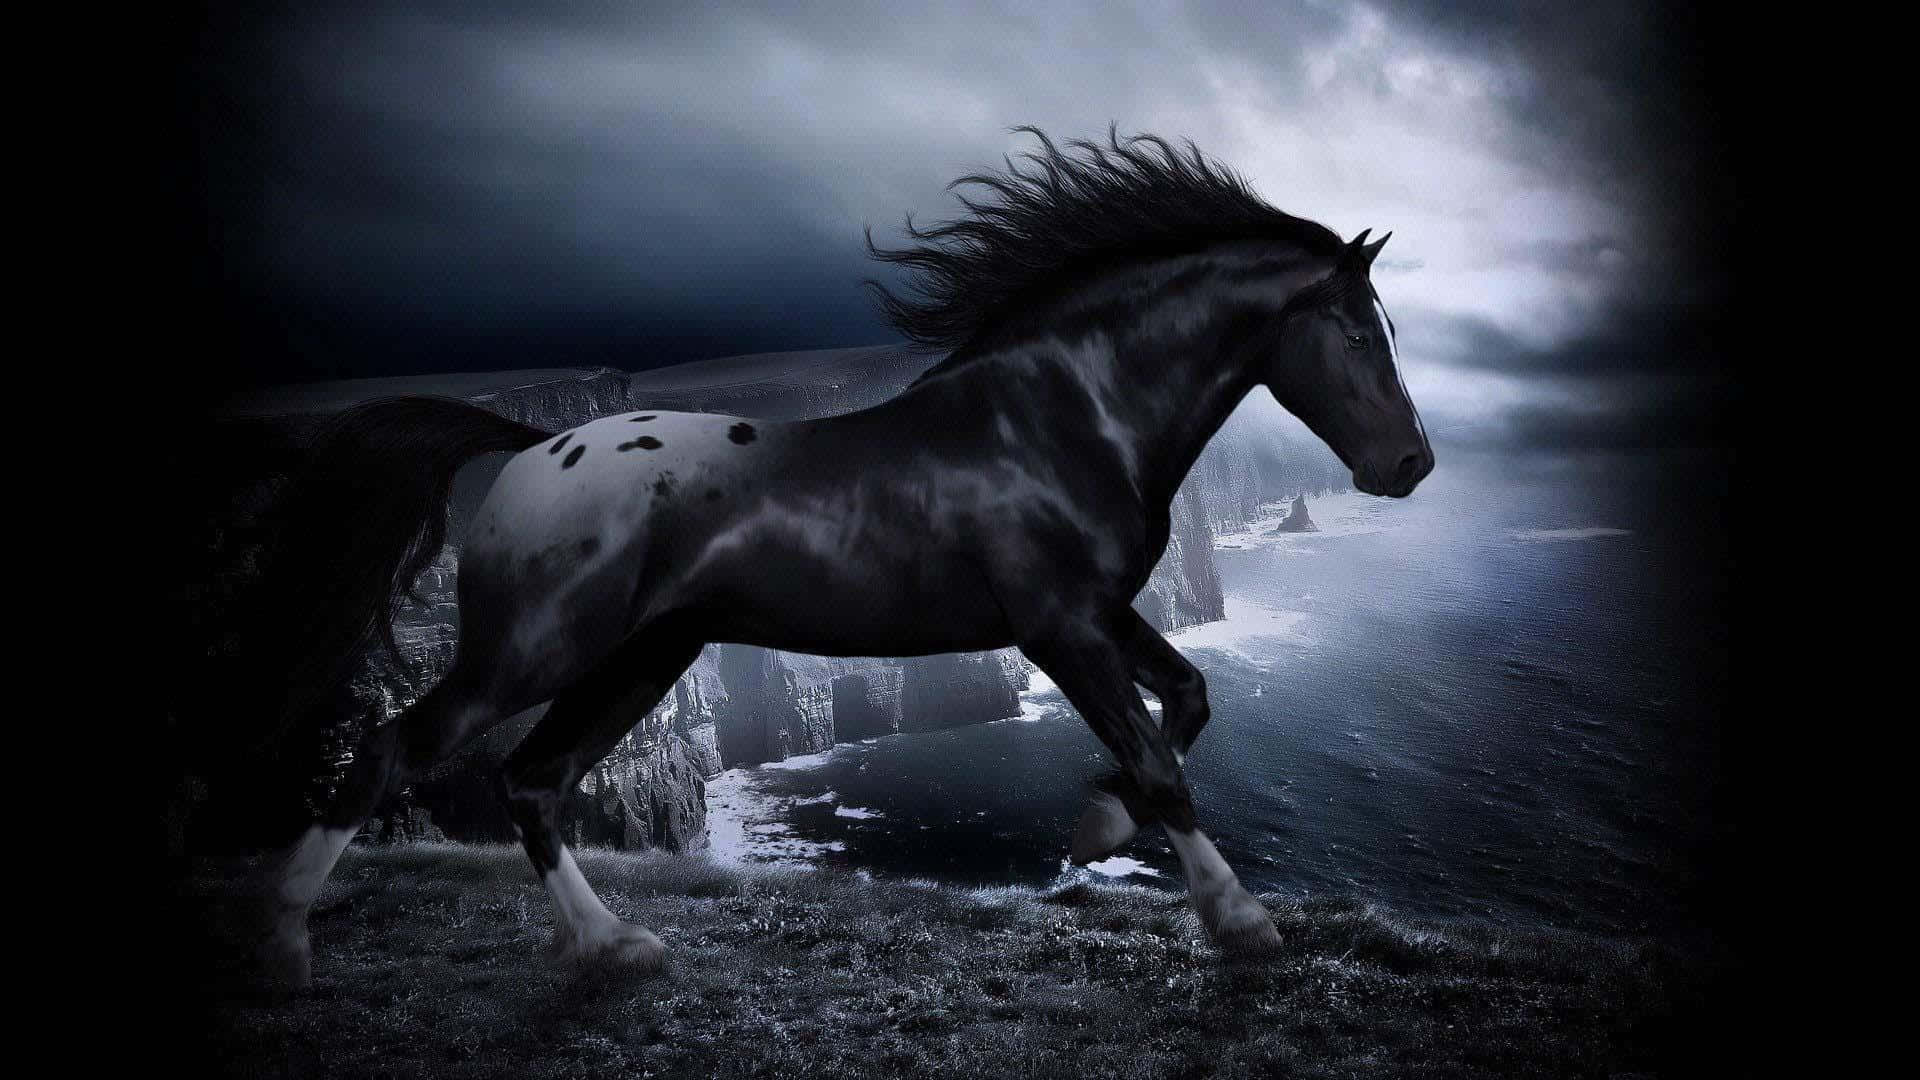 "A wild horse galloping through the vast fields, showcasing its grace and beauty" Wallpaper